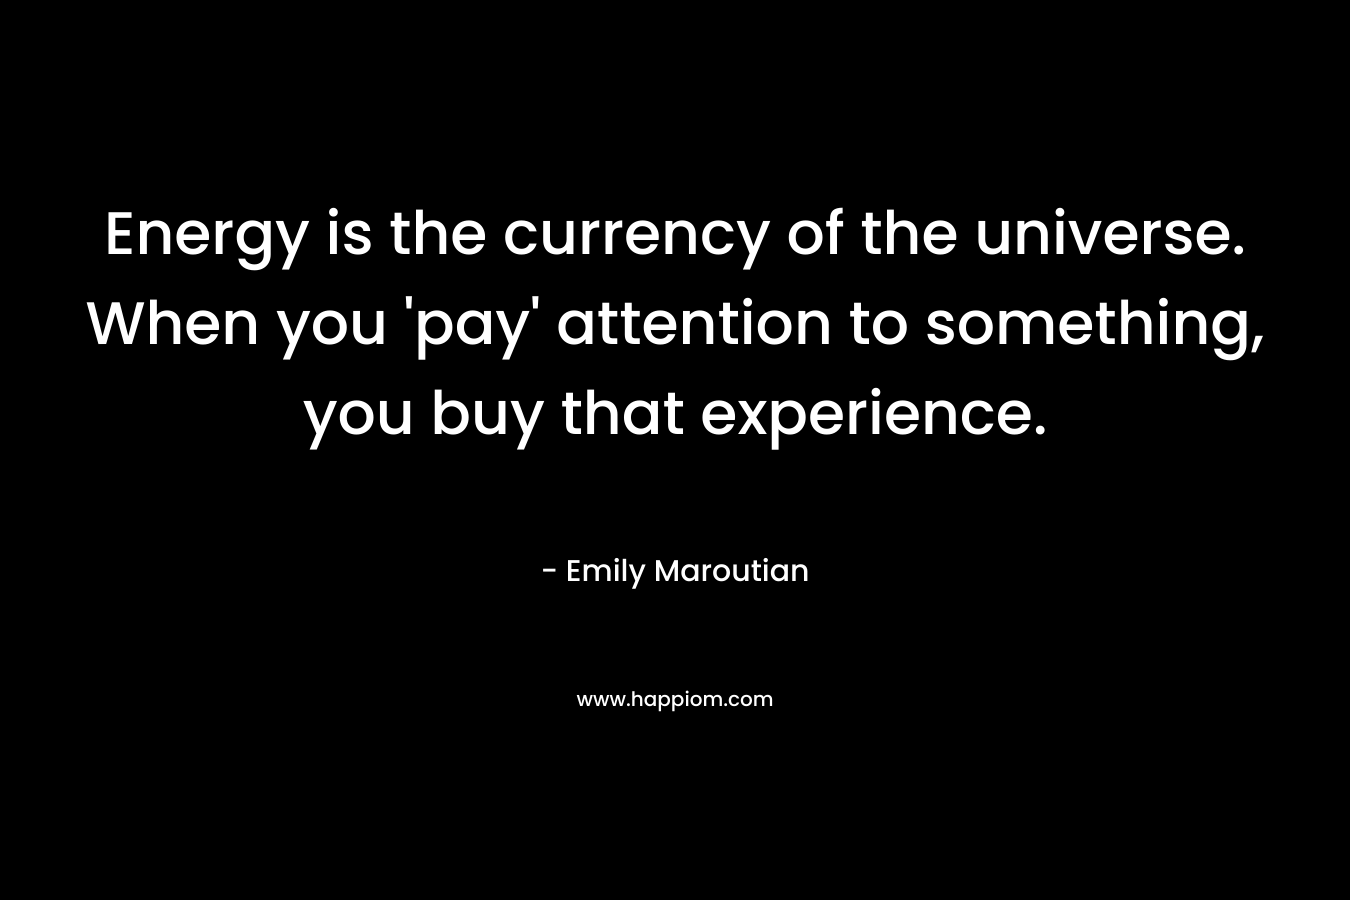 Energy is the currency of the universe. When you 'pay' attention to something, you buy that experience.